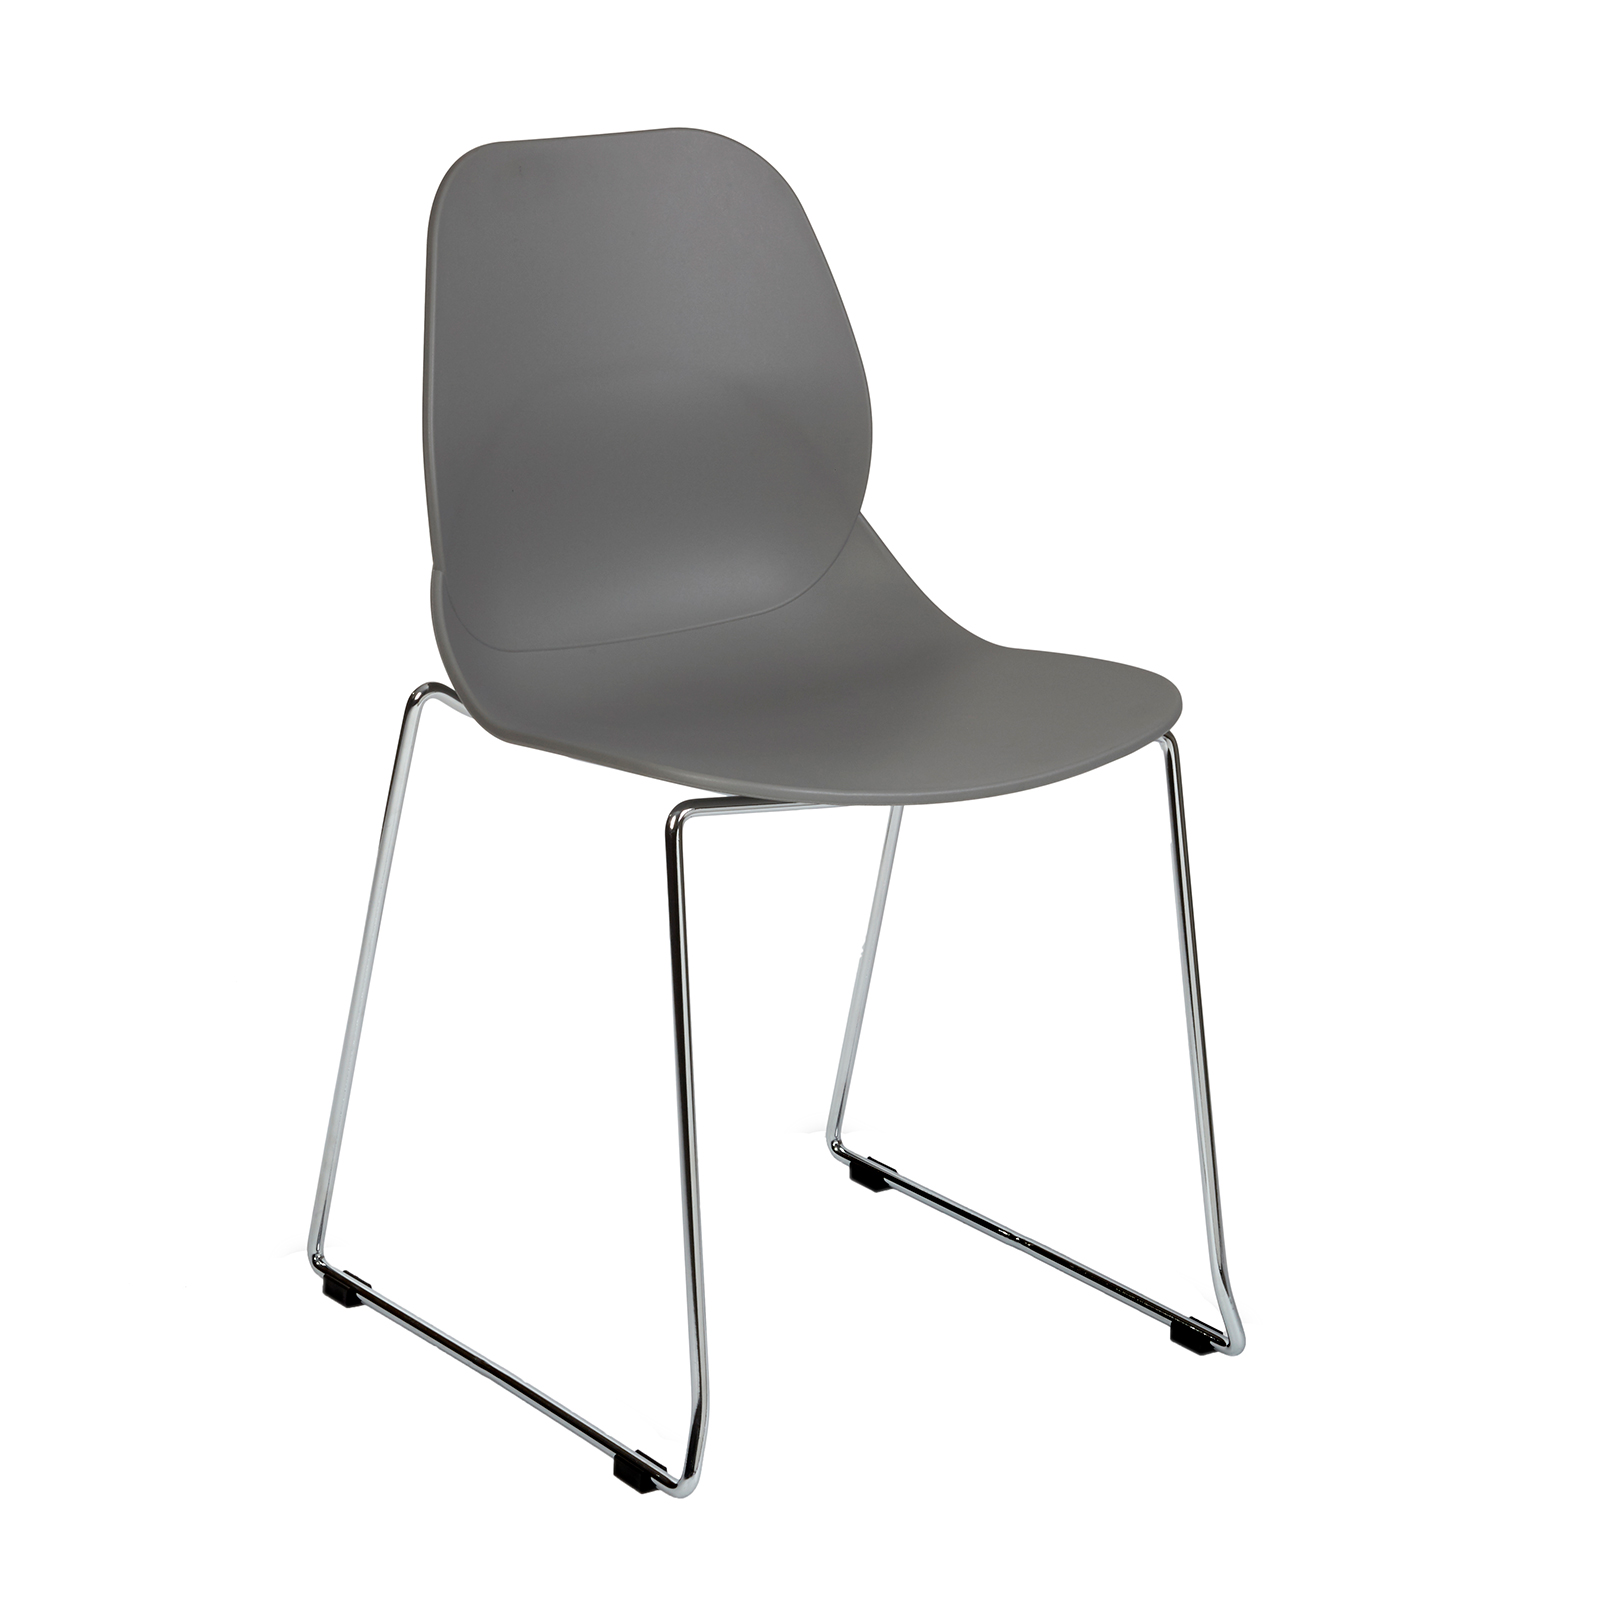 Strut multi-purpose chair with chrome sled frame - grey